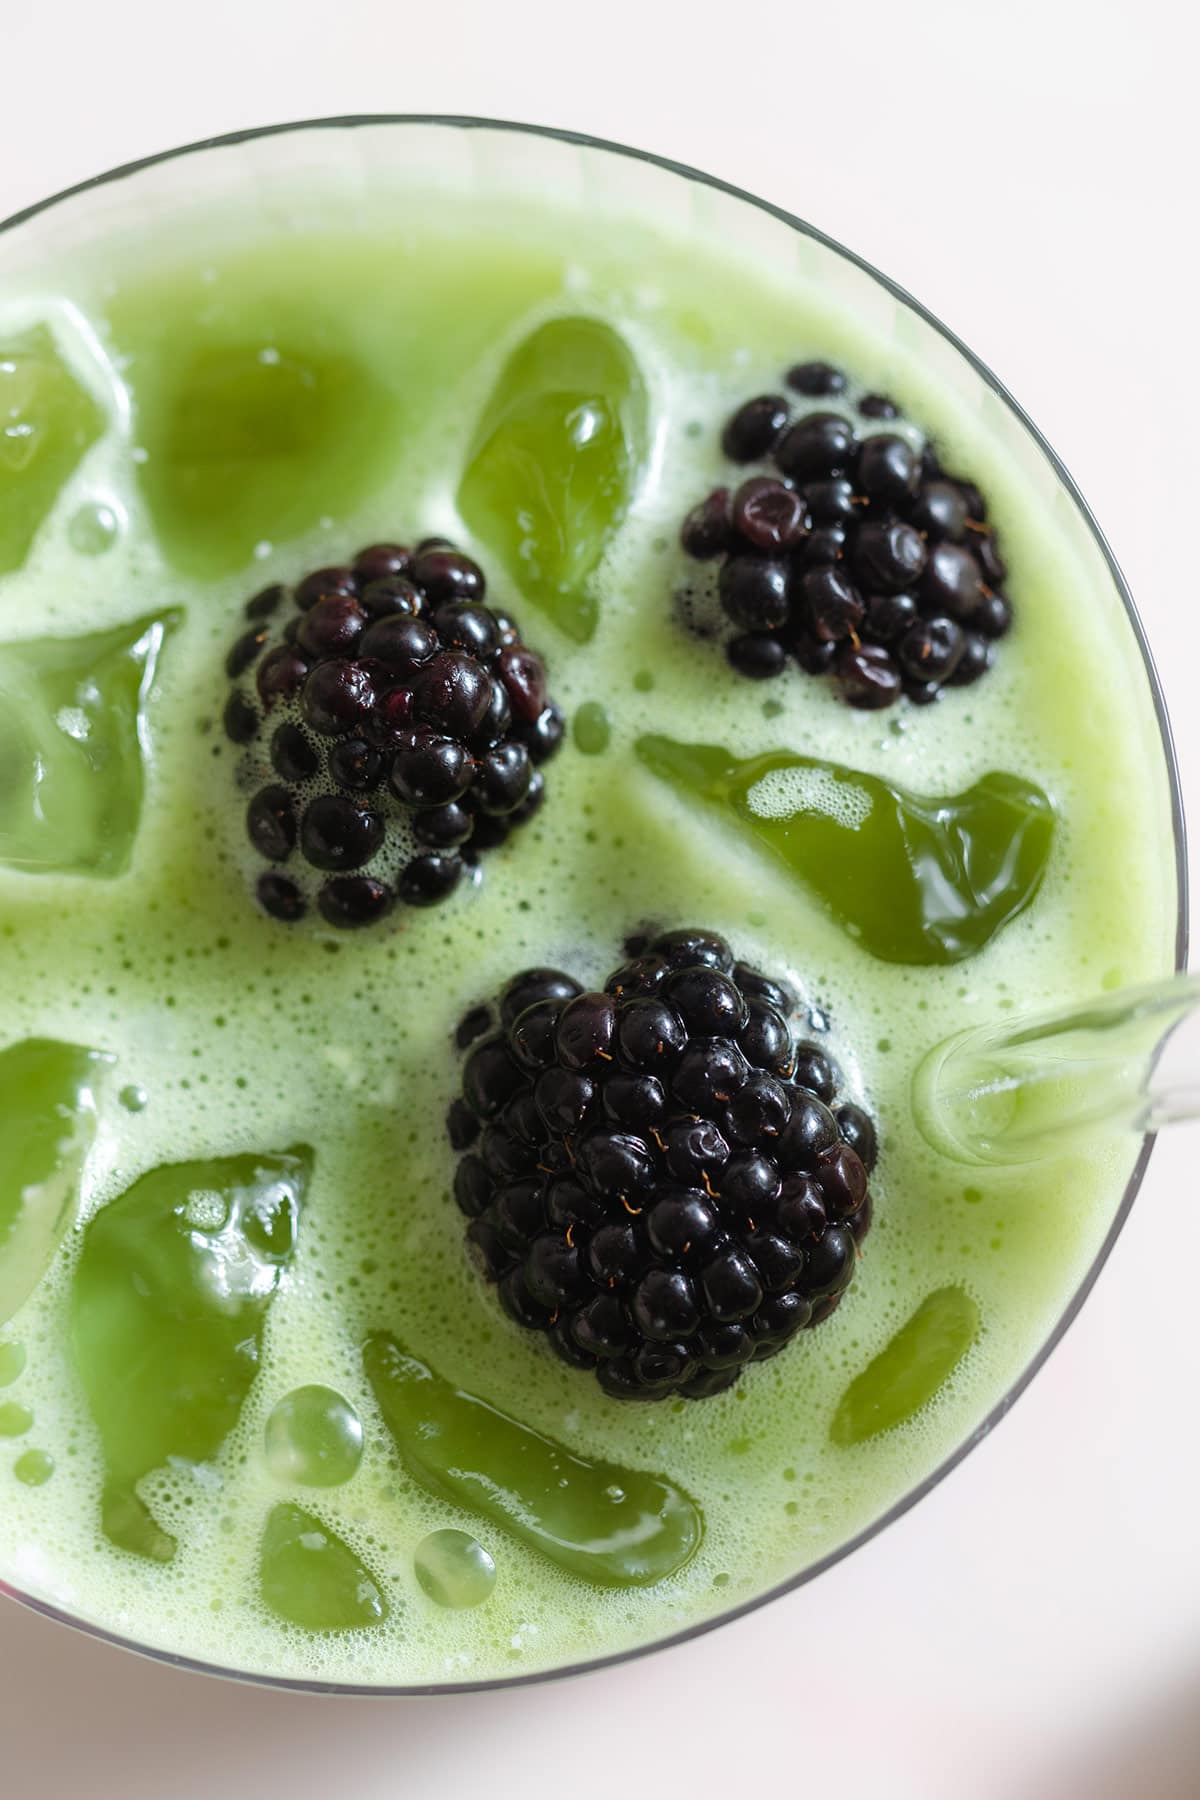 Iced matcha latte in a glass garnished with fresh blackberries.